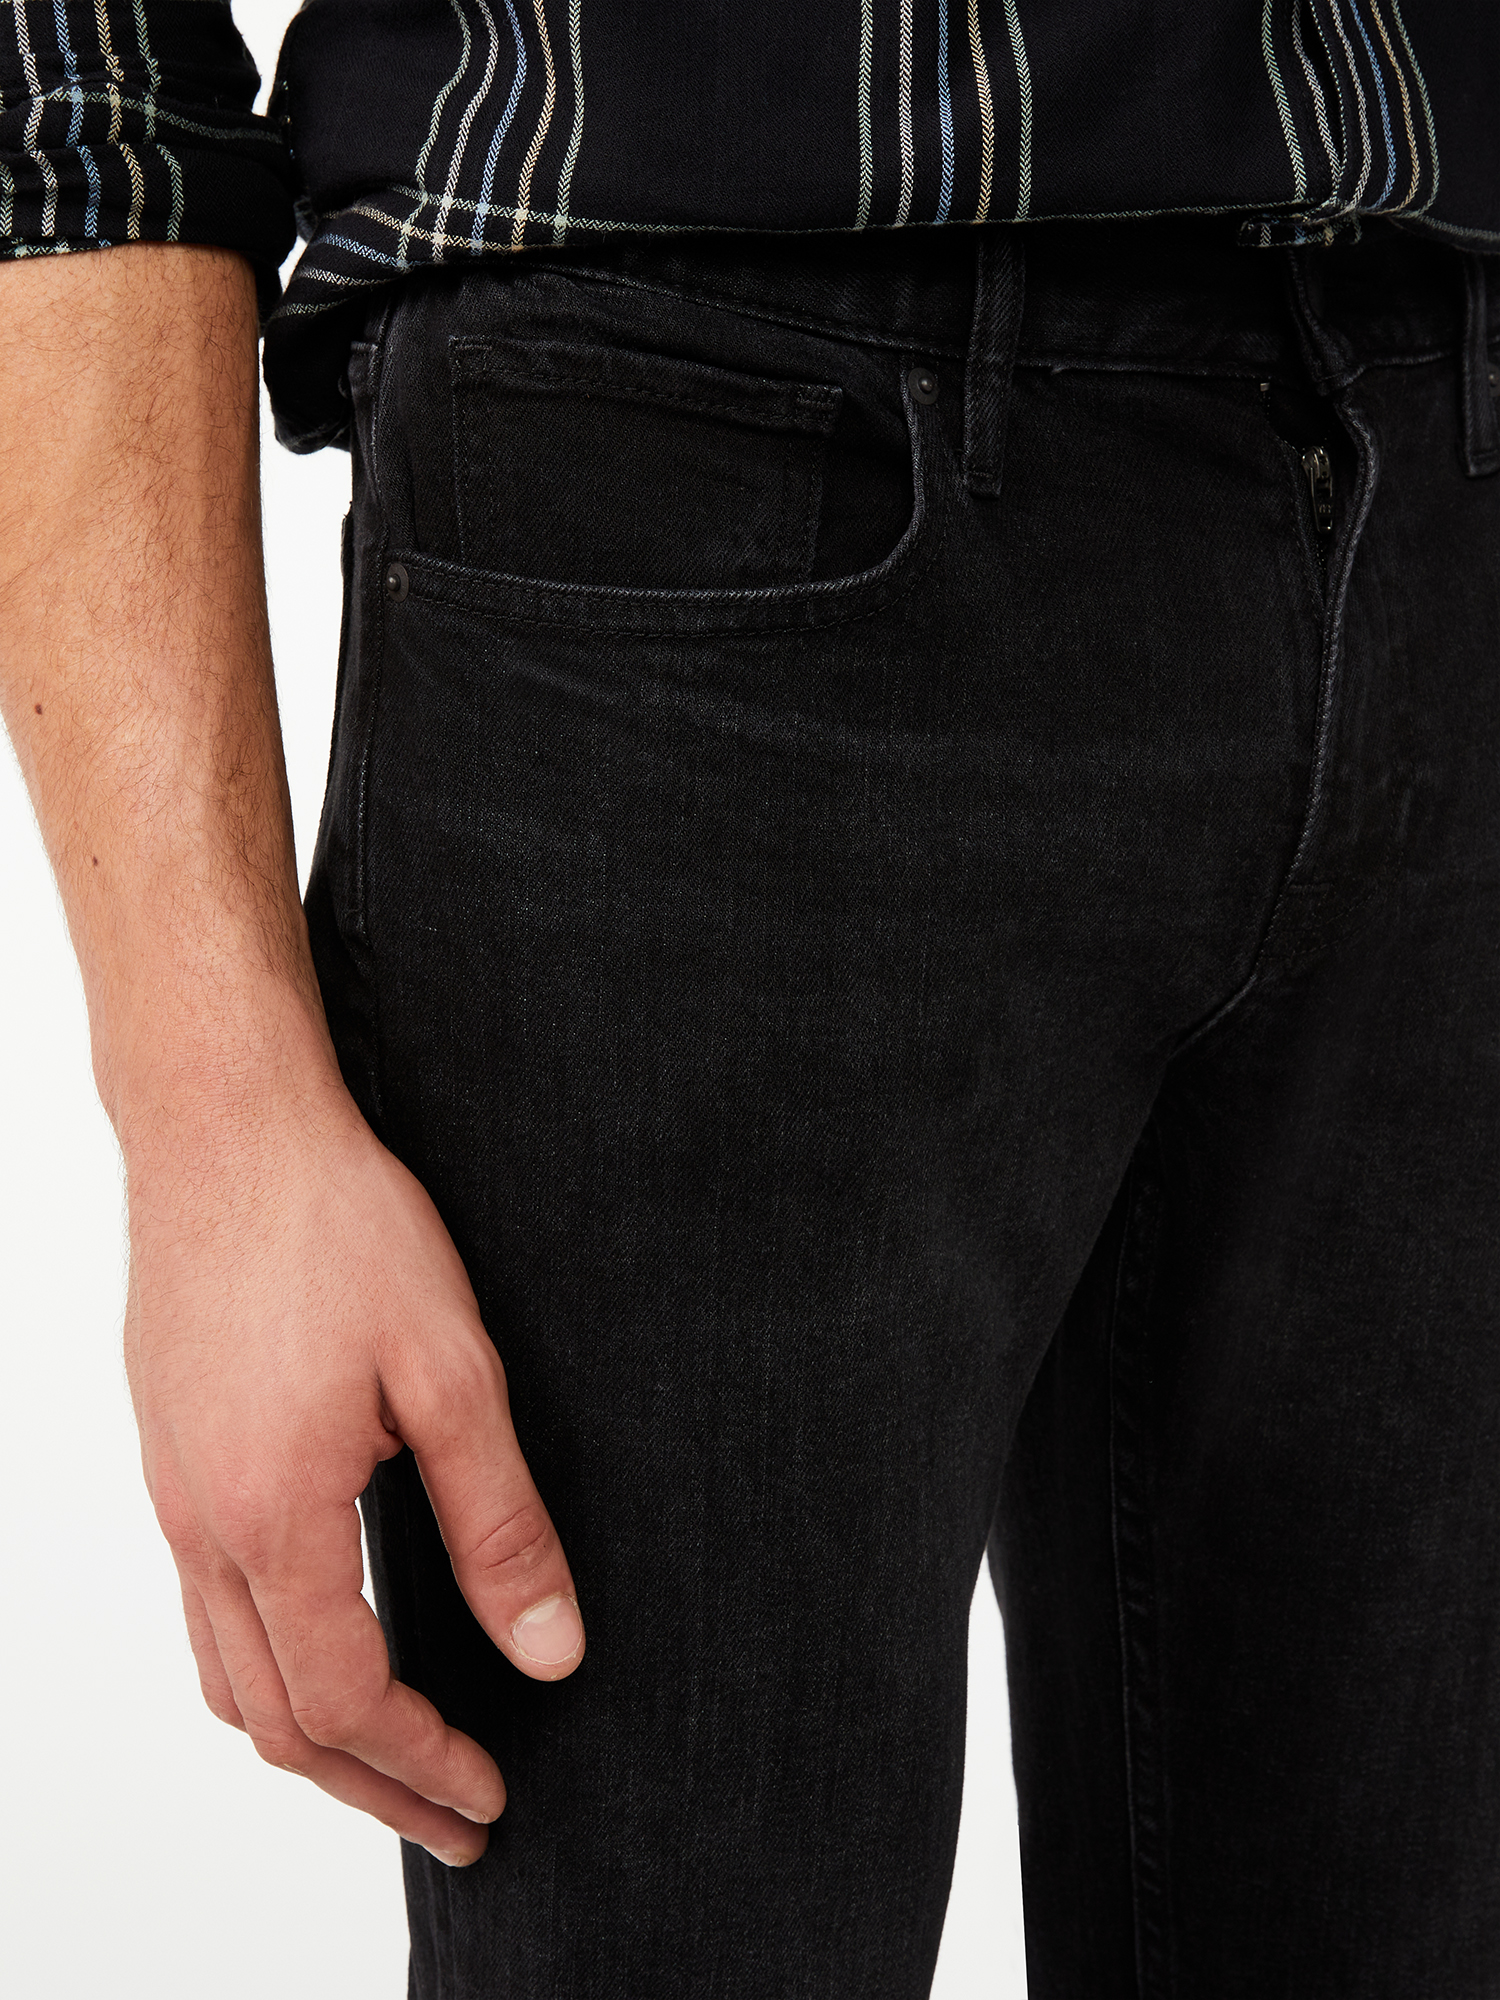 Free Assembly Men's Slim Fit Jeans - image 3 of 5